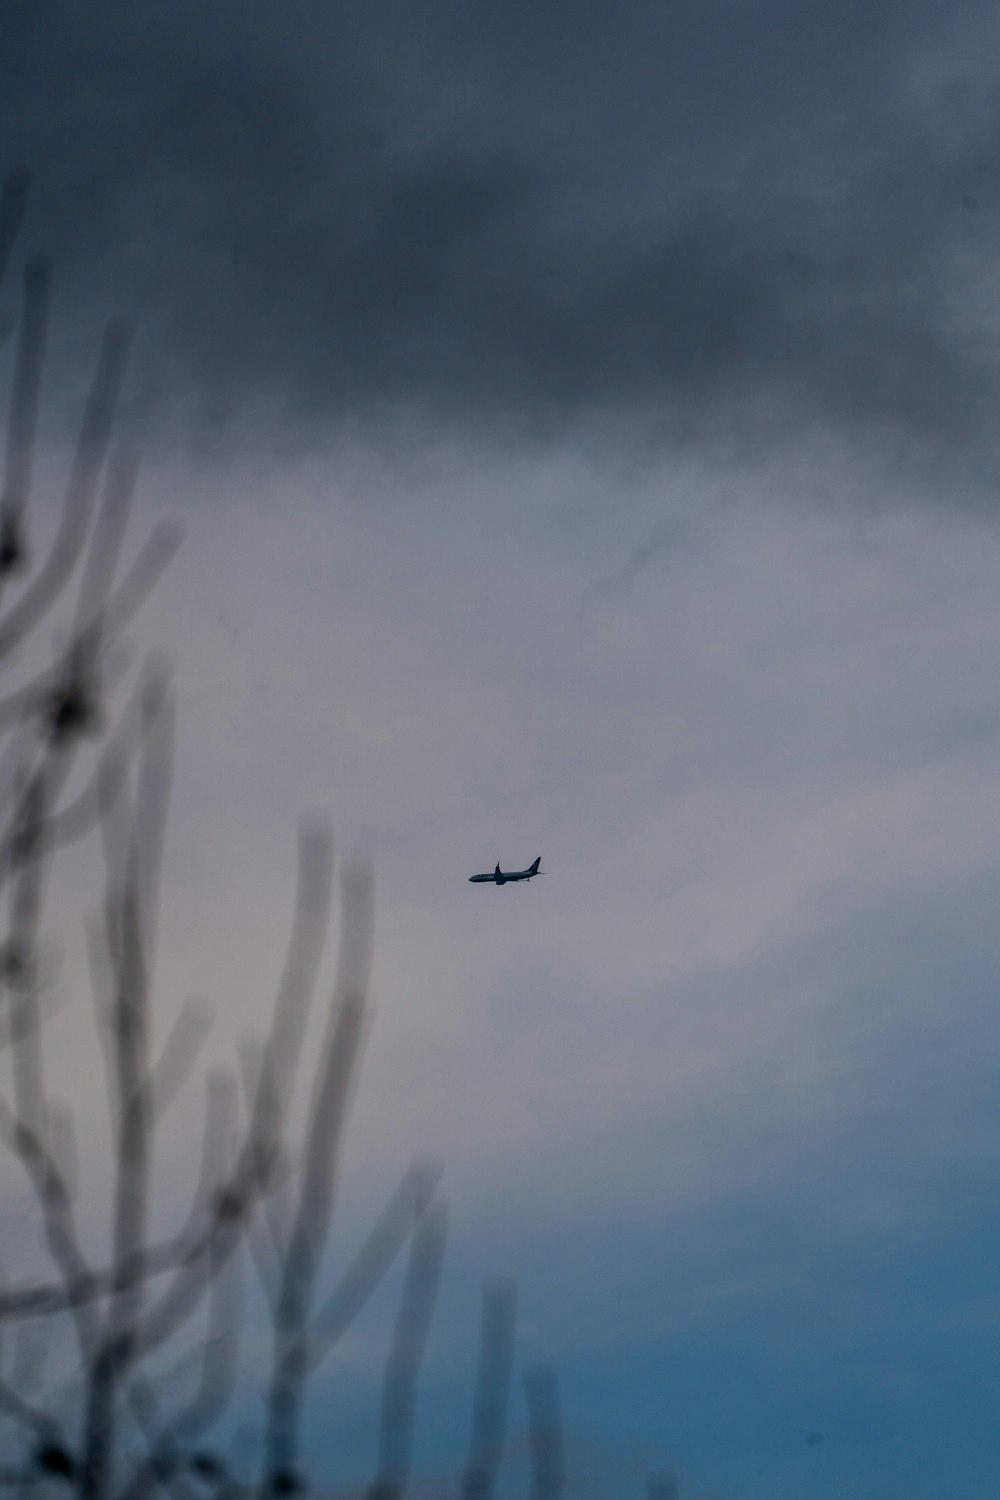 a plane flying through a cloudy sky with trees in the foreground